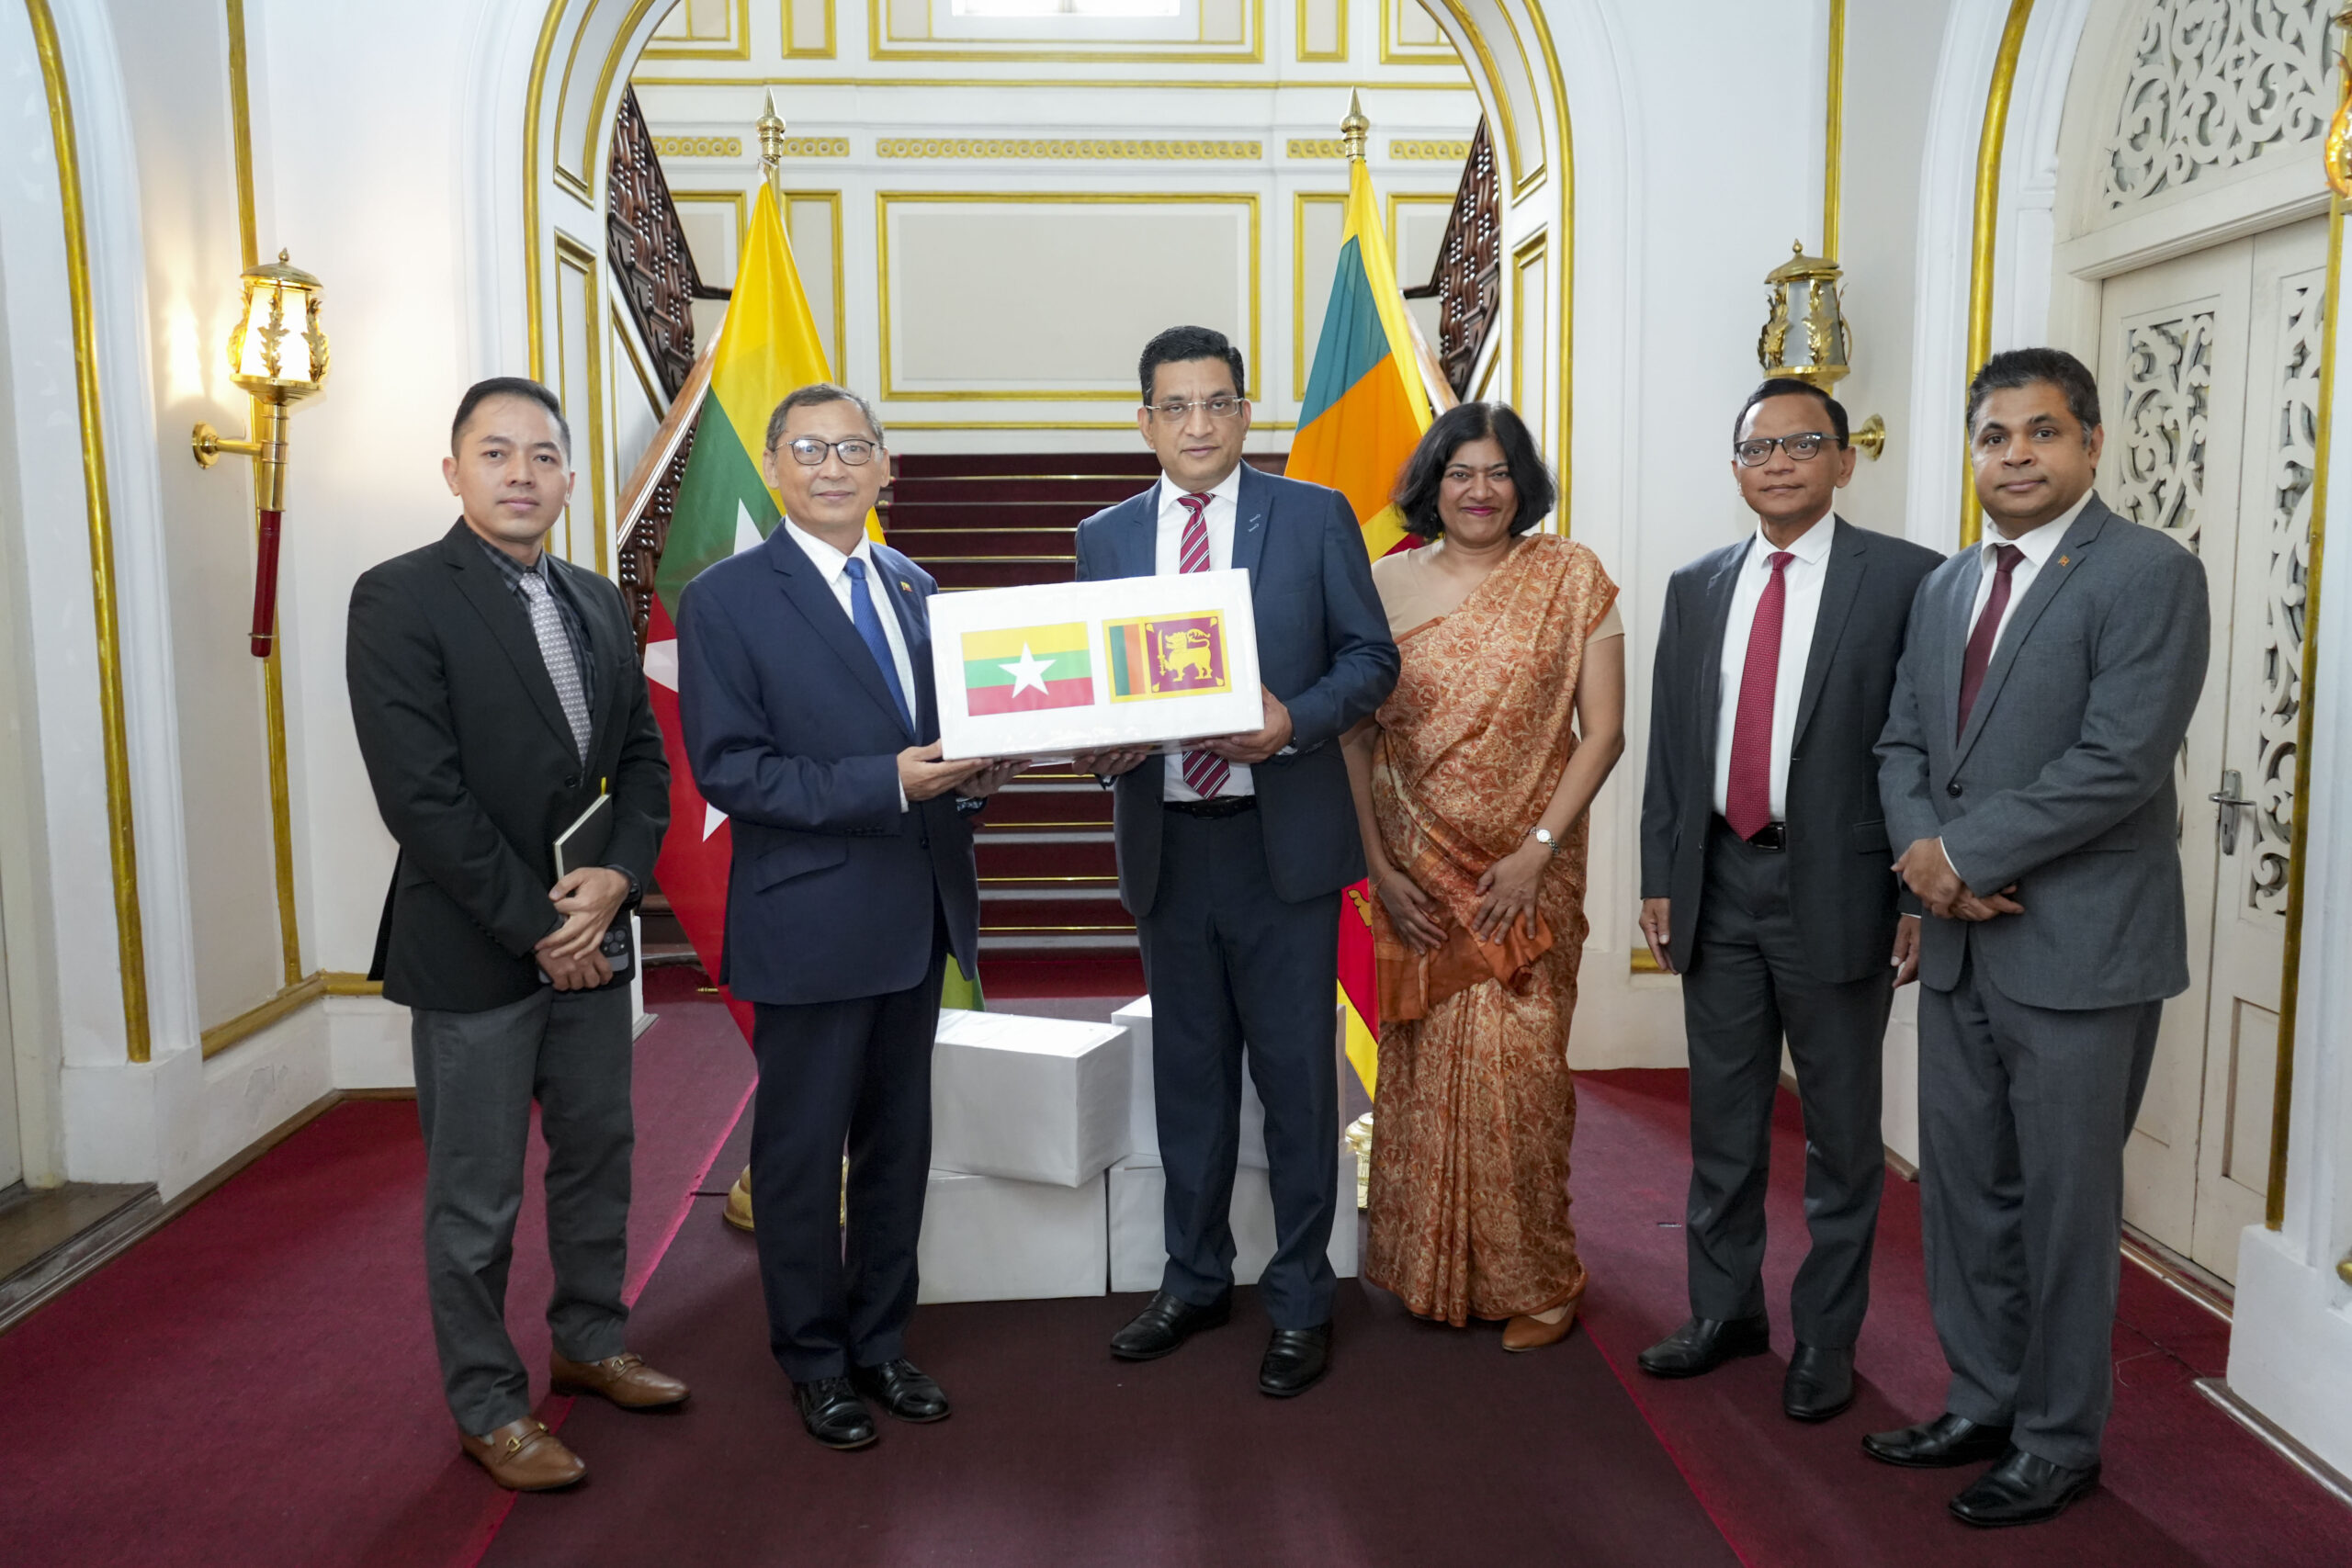 Sri Lanka Extends Support to Cyclone MOCHA Victims in Myanmar with Ceylon Tea Donation